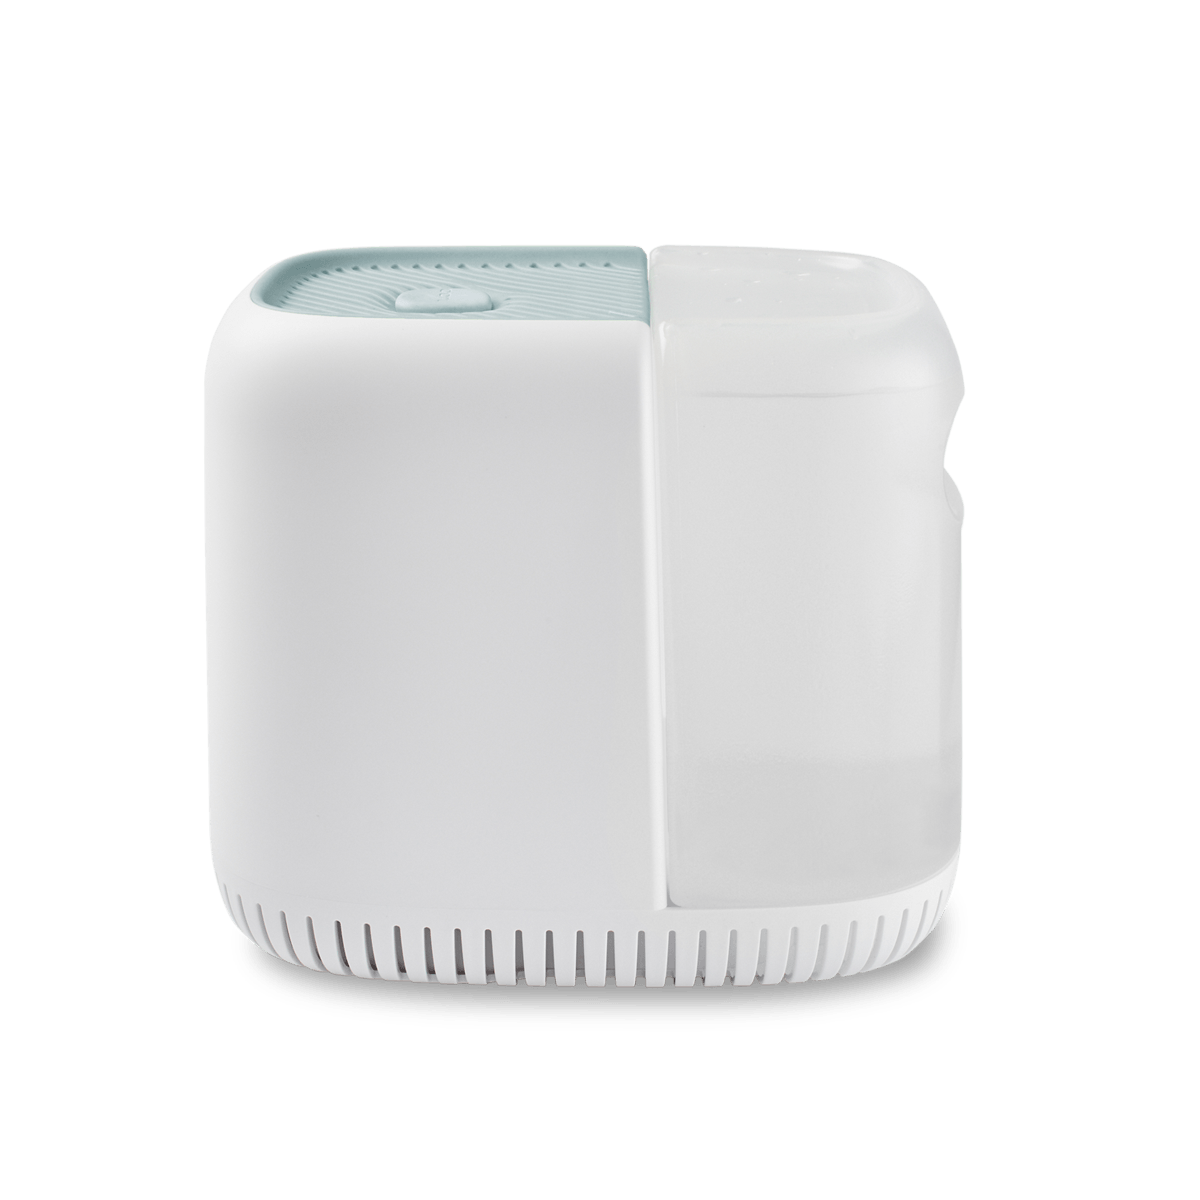 Canopy Humidifier with Little Dreams Aroma Kit